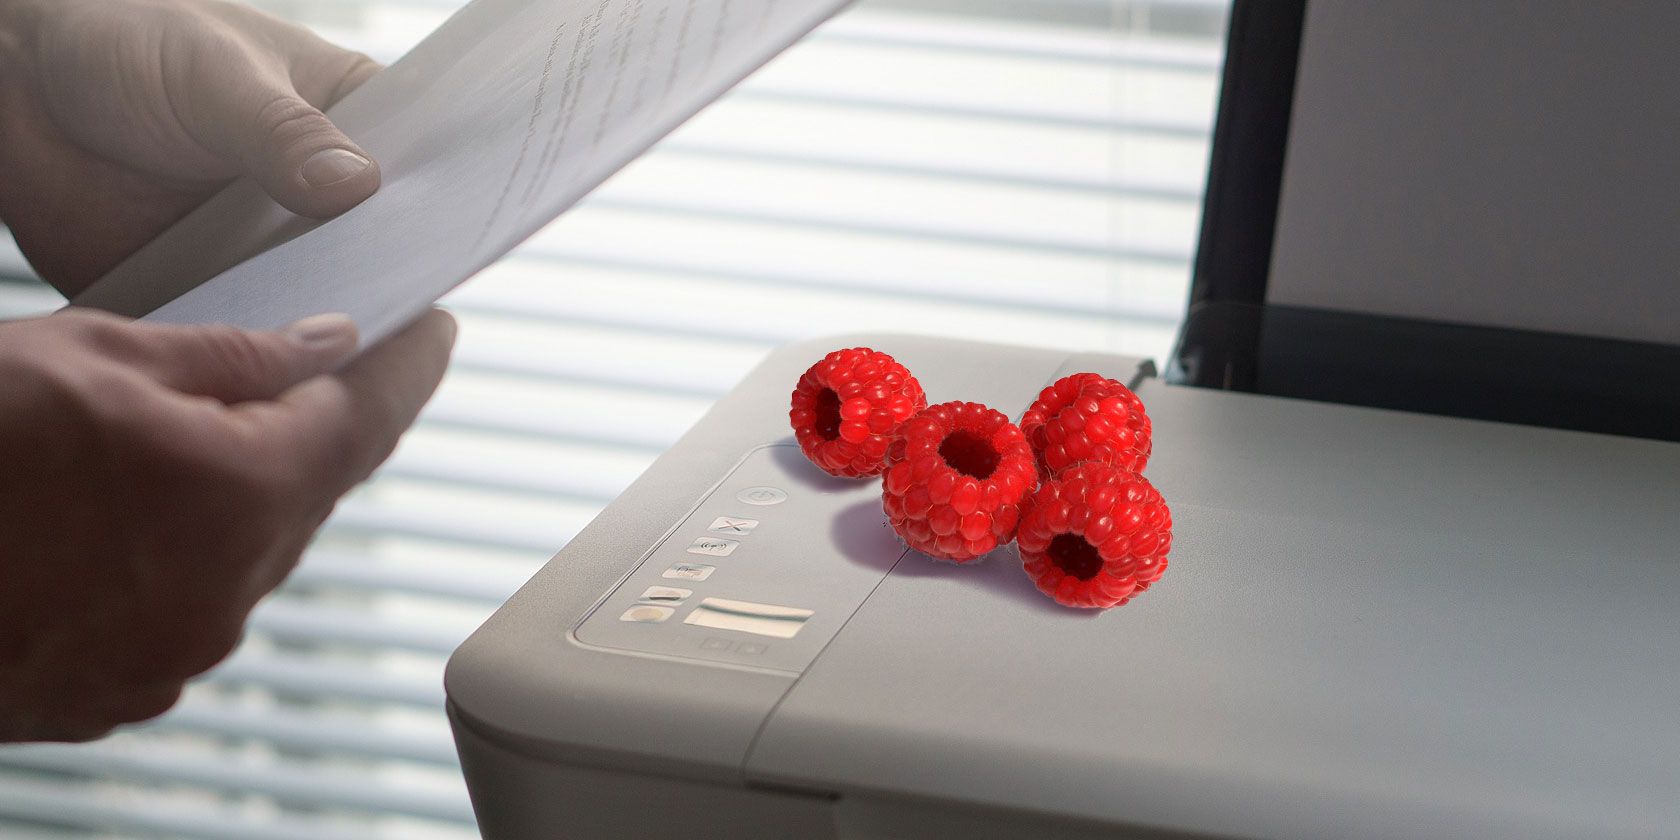 3D Printing Can Make Hidden Pockets for Storing Money and Even